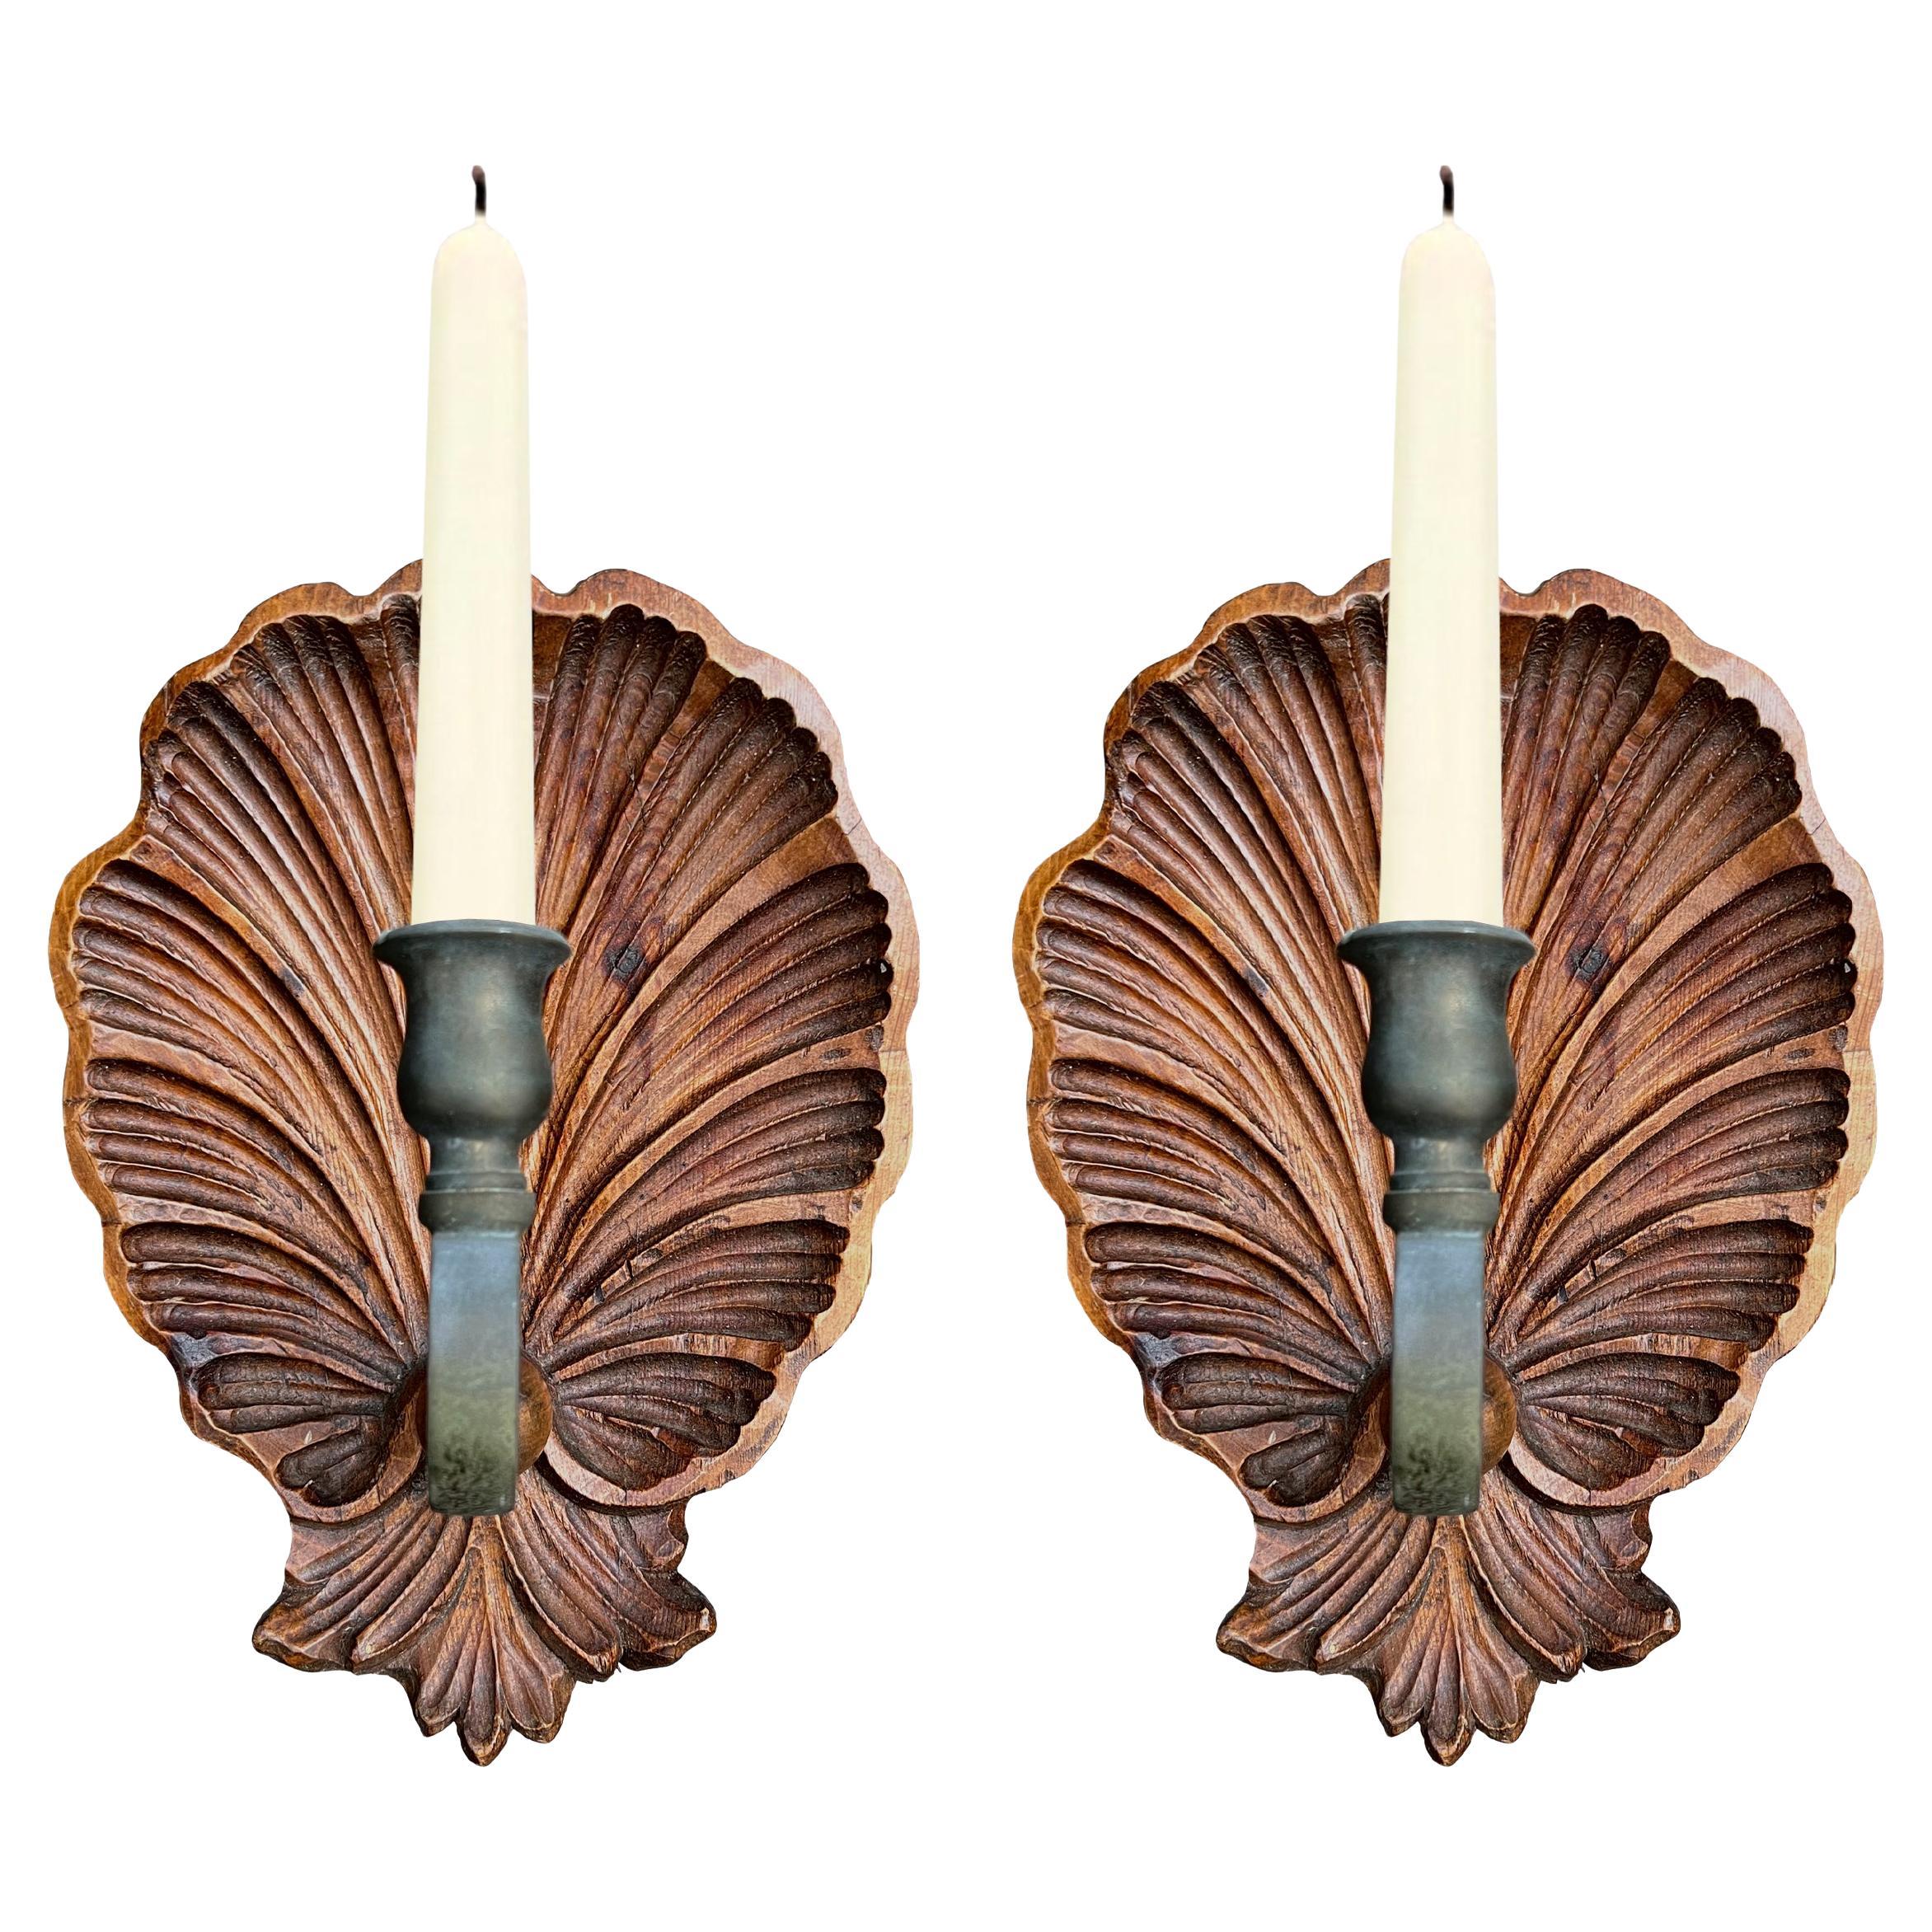 Pair of Vintage Italian Shell Candle Sconces